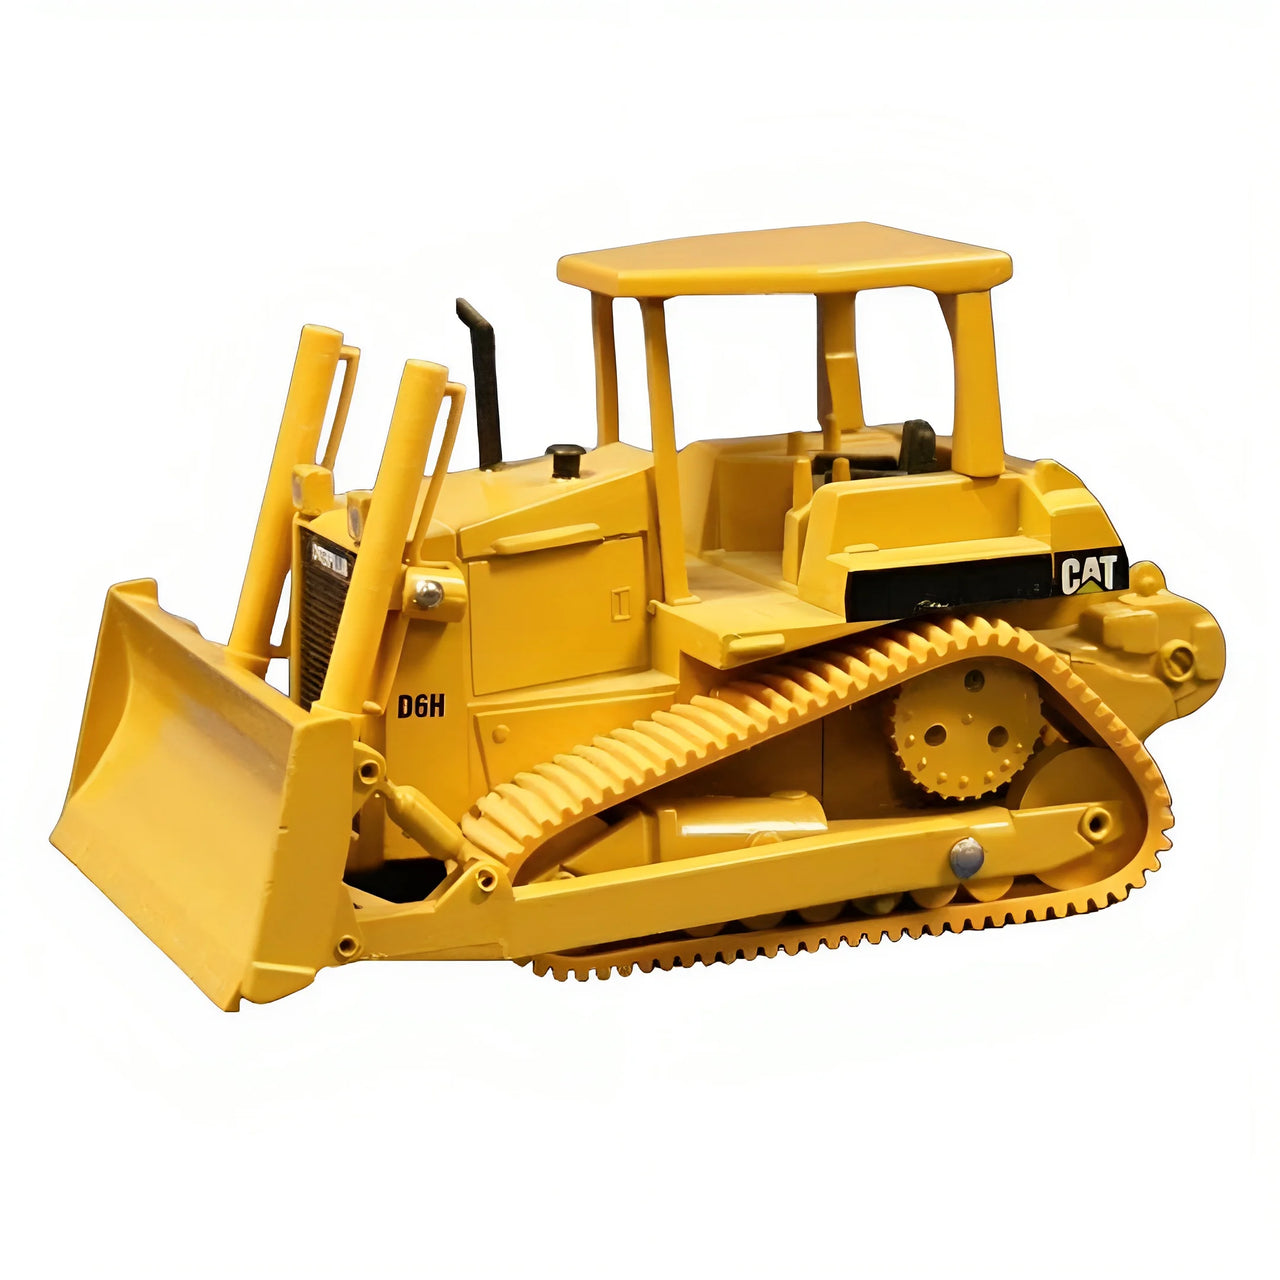 2851W-R Caterpillar D6H Crawler Tractor Scale 1:50 (Discontinued Model)